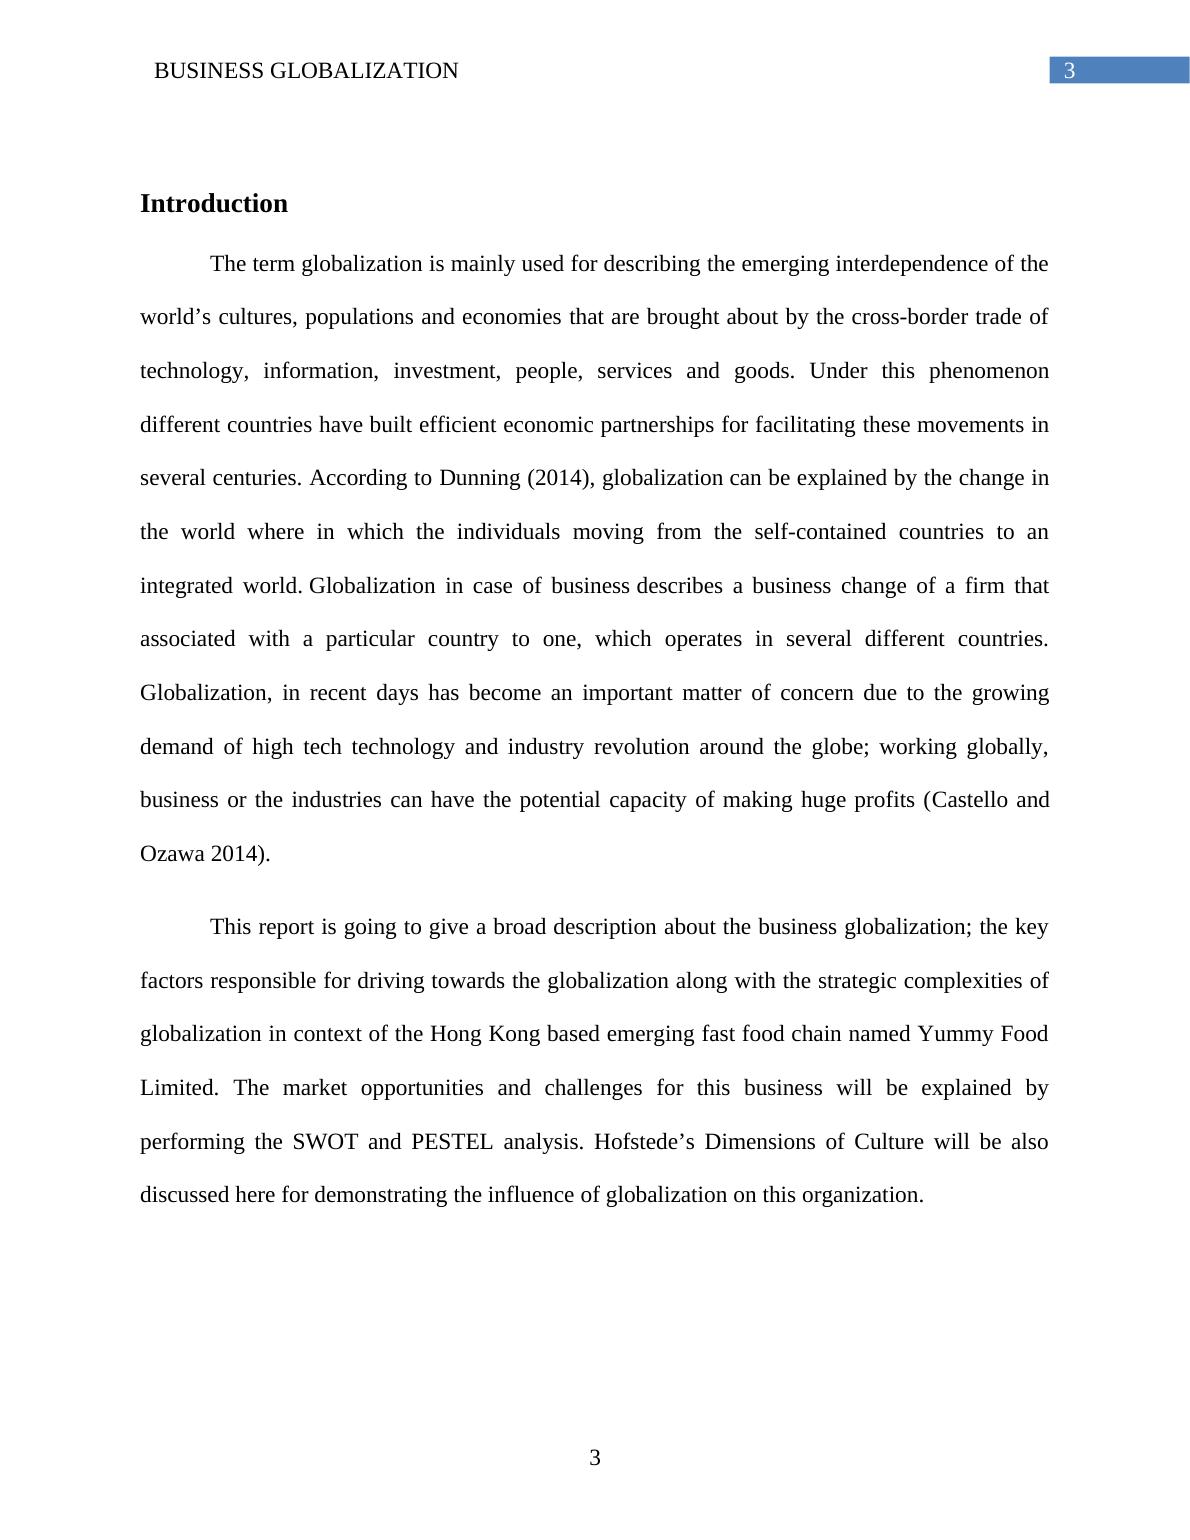 Global business environment and strategic complexity Research Paper 2022_5